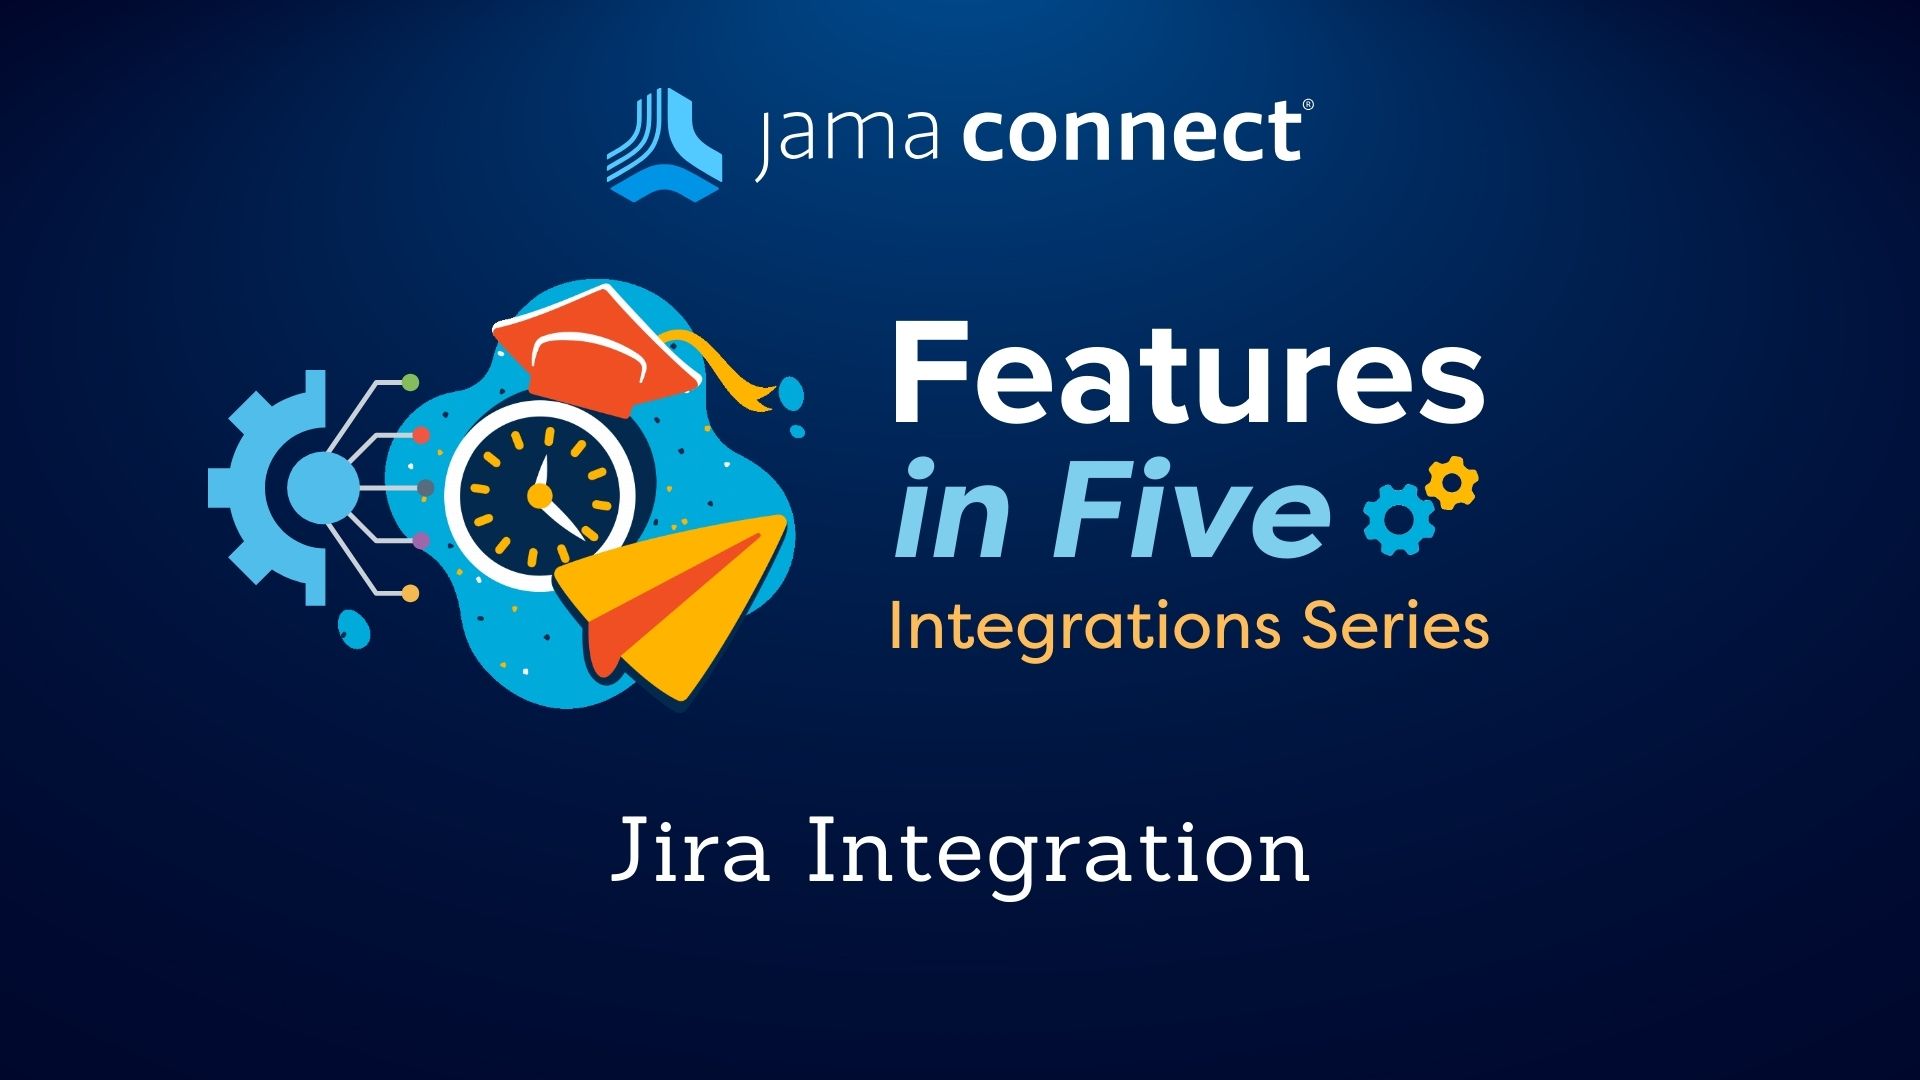 This image portrays a demo between Jama Connect and Jira